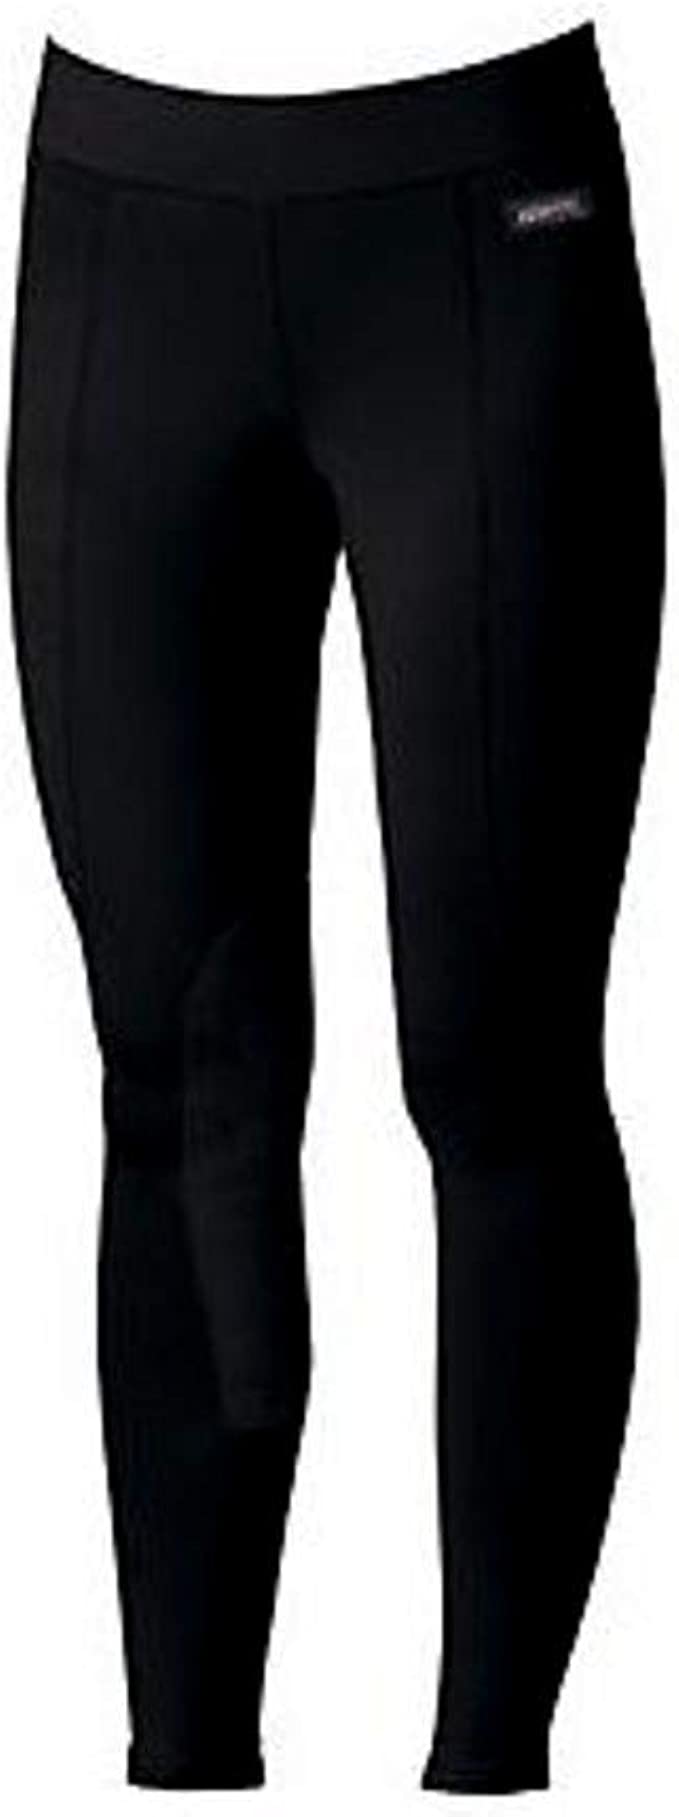 Teal Kerrits Flow Rise Women's Knee Patch Performance Tights